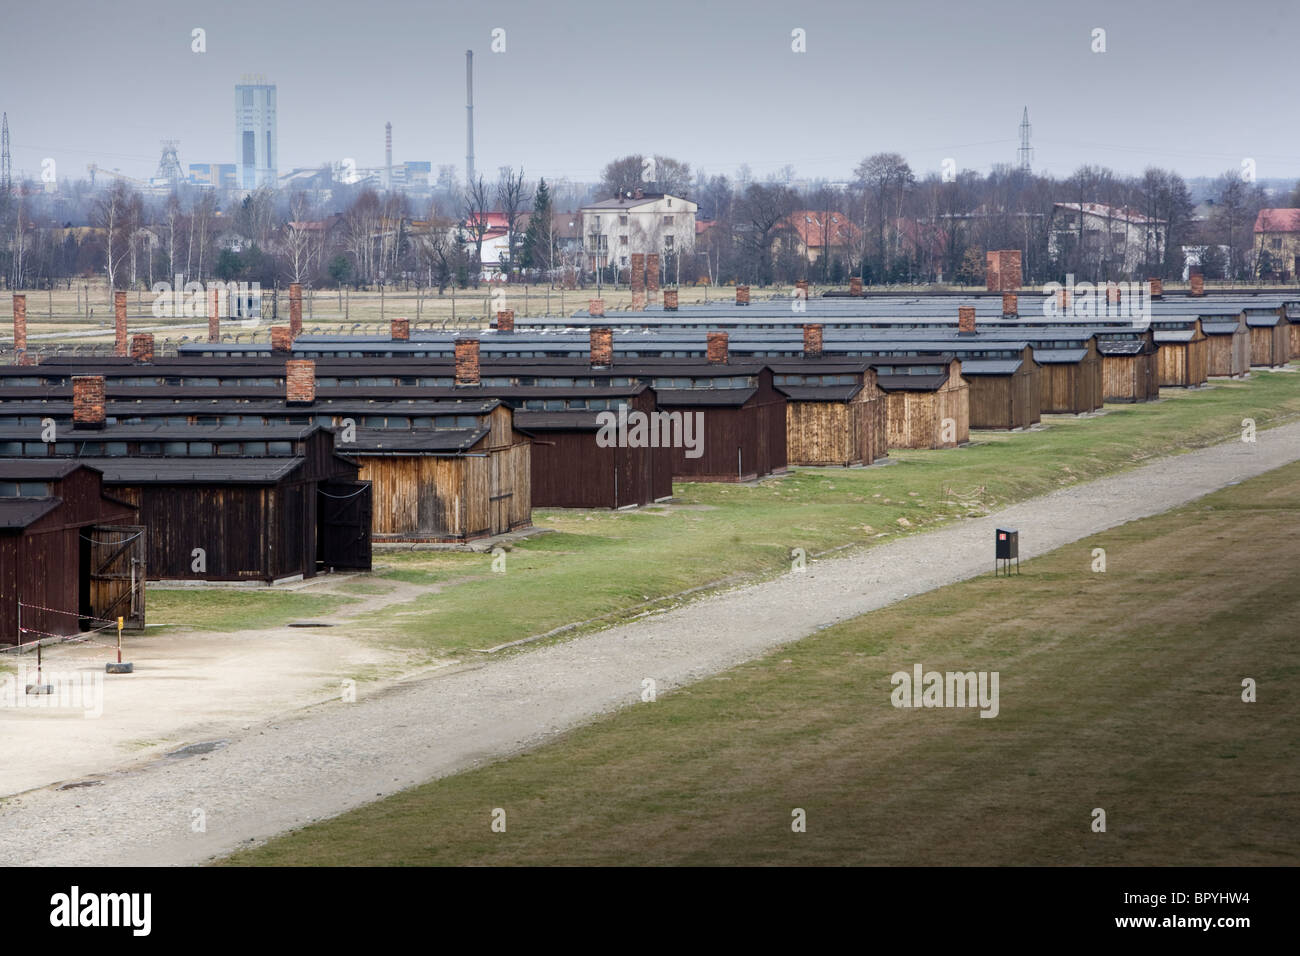 Accommodation huts still standing with demolished ones in background at Auschwitz Birkenau Concentration camp, Poland. Stock Photo